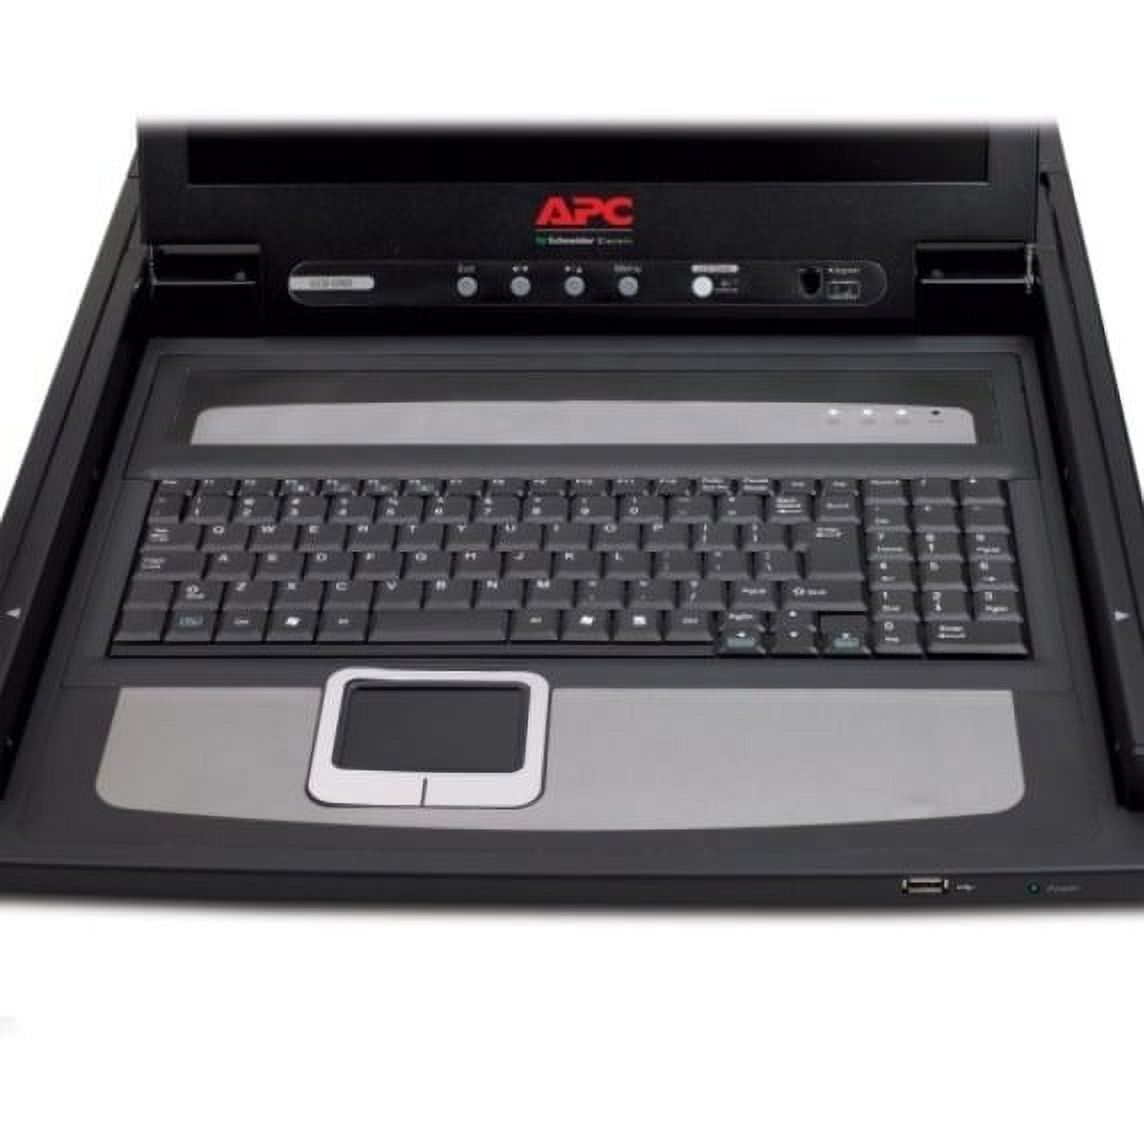 APC AP5719 19" Rack LCD Console - image 4 of 4